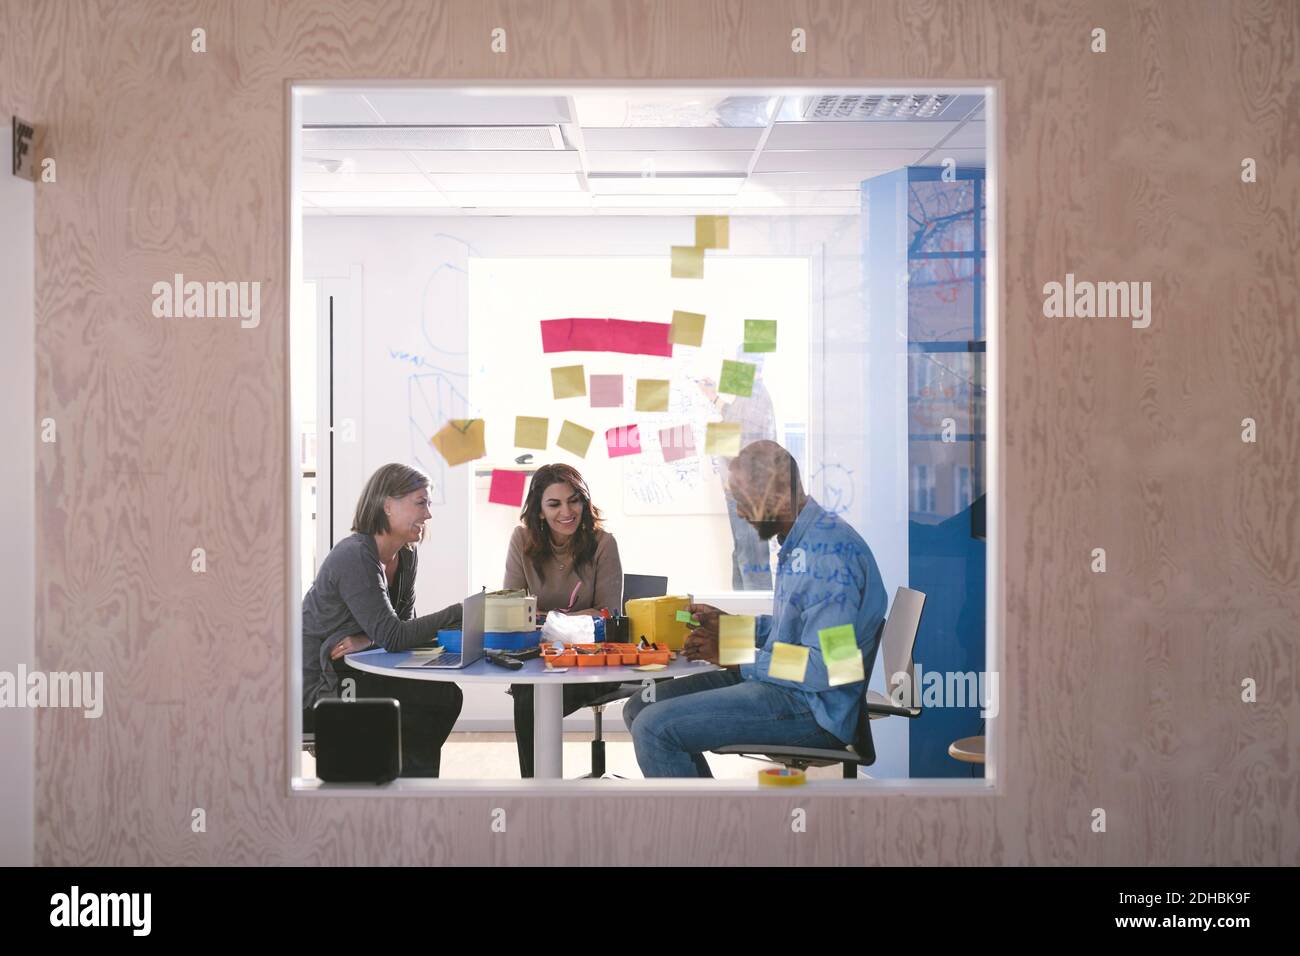 Adhesive notes stuck on glass with business professionals working in background Stock Photo